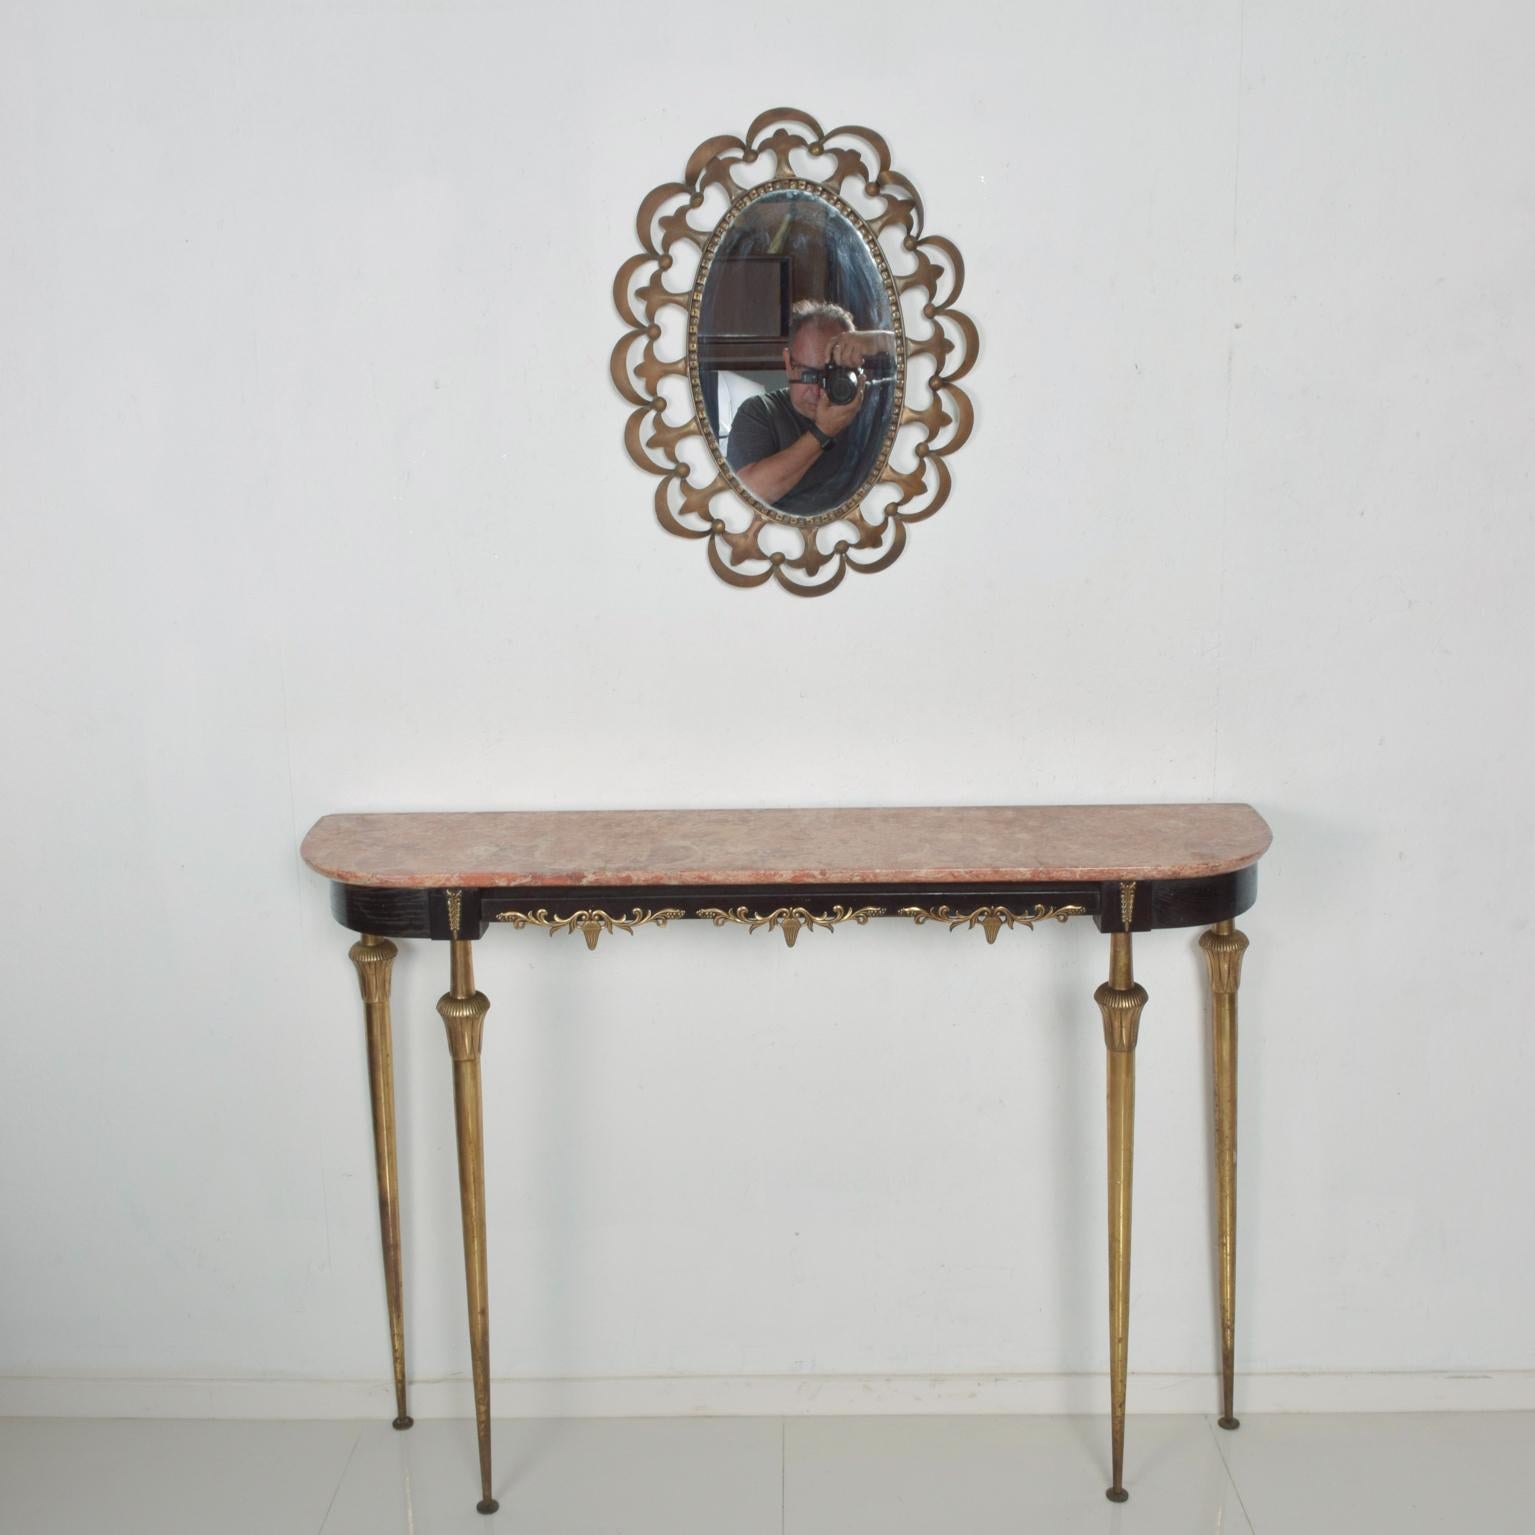 We are pleased to offer for your consideration, a beautiful console entry table, made in Italy, circa late 1940s. The table has an original top made of pink-reddish tones, which rest in top on a sculptural wood frame painted in black with bronze